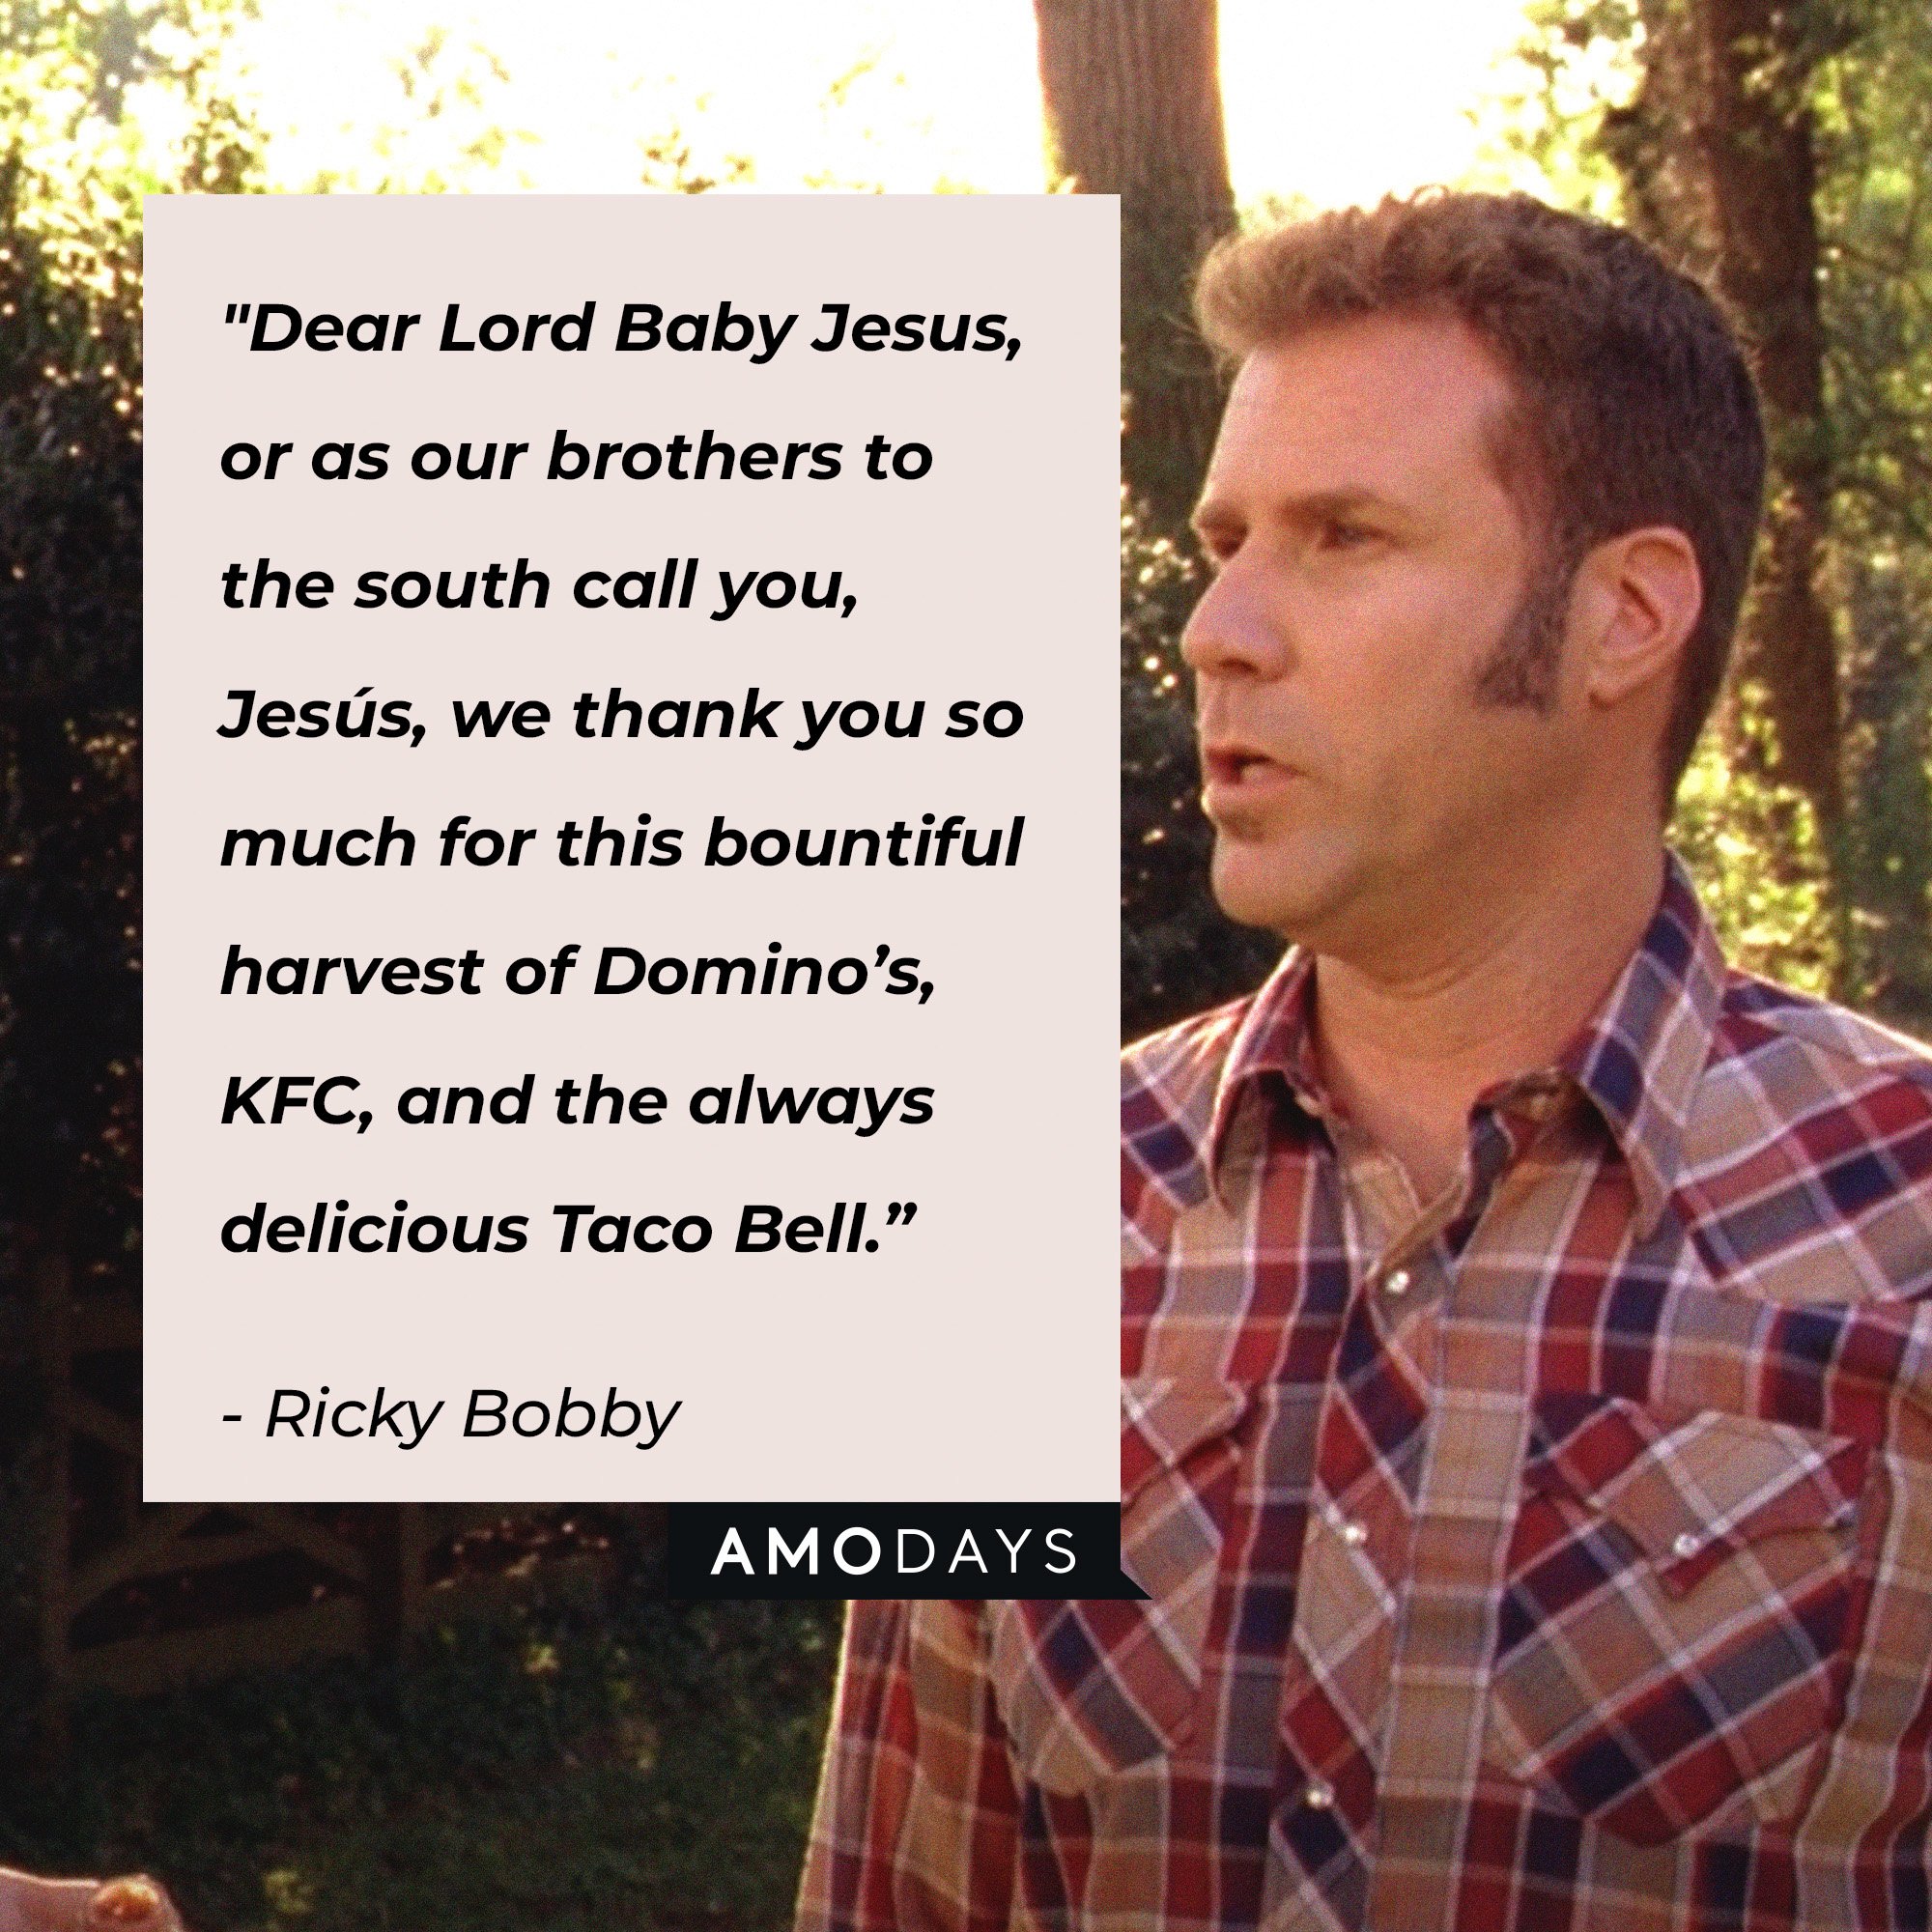 Ricky Bobby’s quote: "Dear Lord Baby Jesus, or as our brothers to the south call you, Jesús, we thank you so much for this bountiful harvest of Domino’s, KFC, and the always delicious Taco Bell." | Image: AmoDays